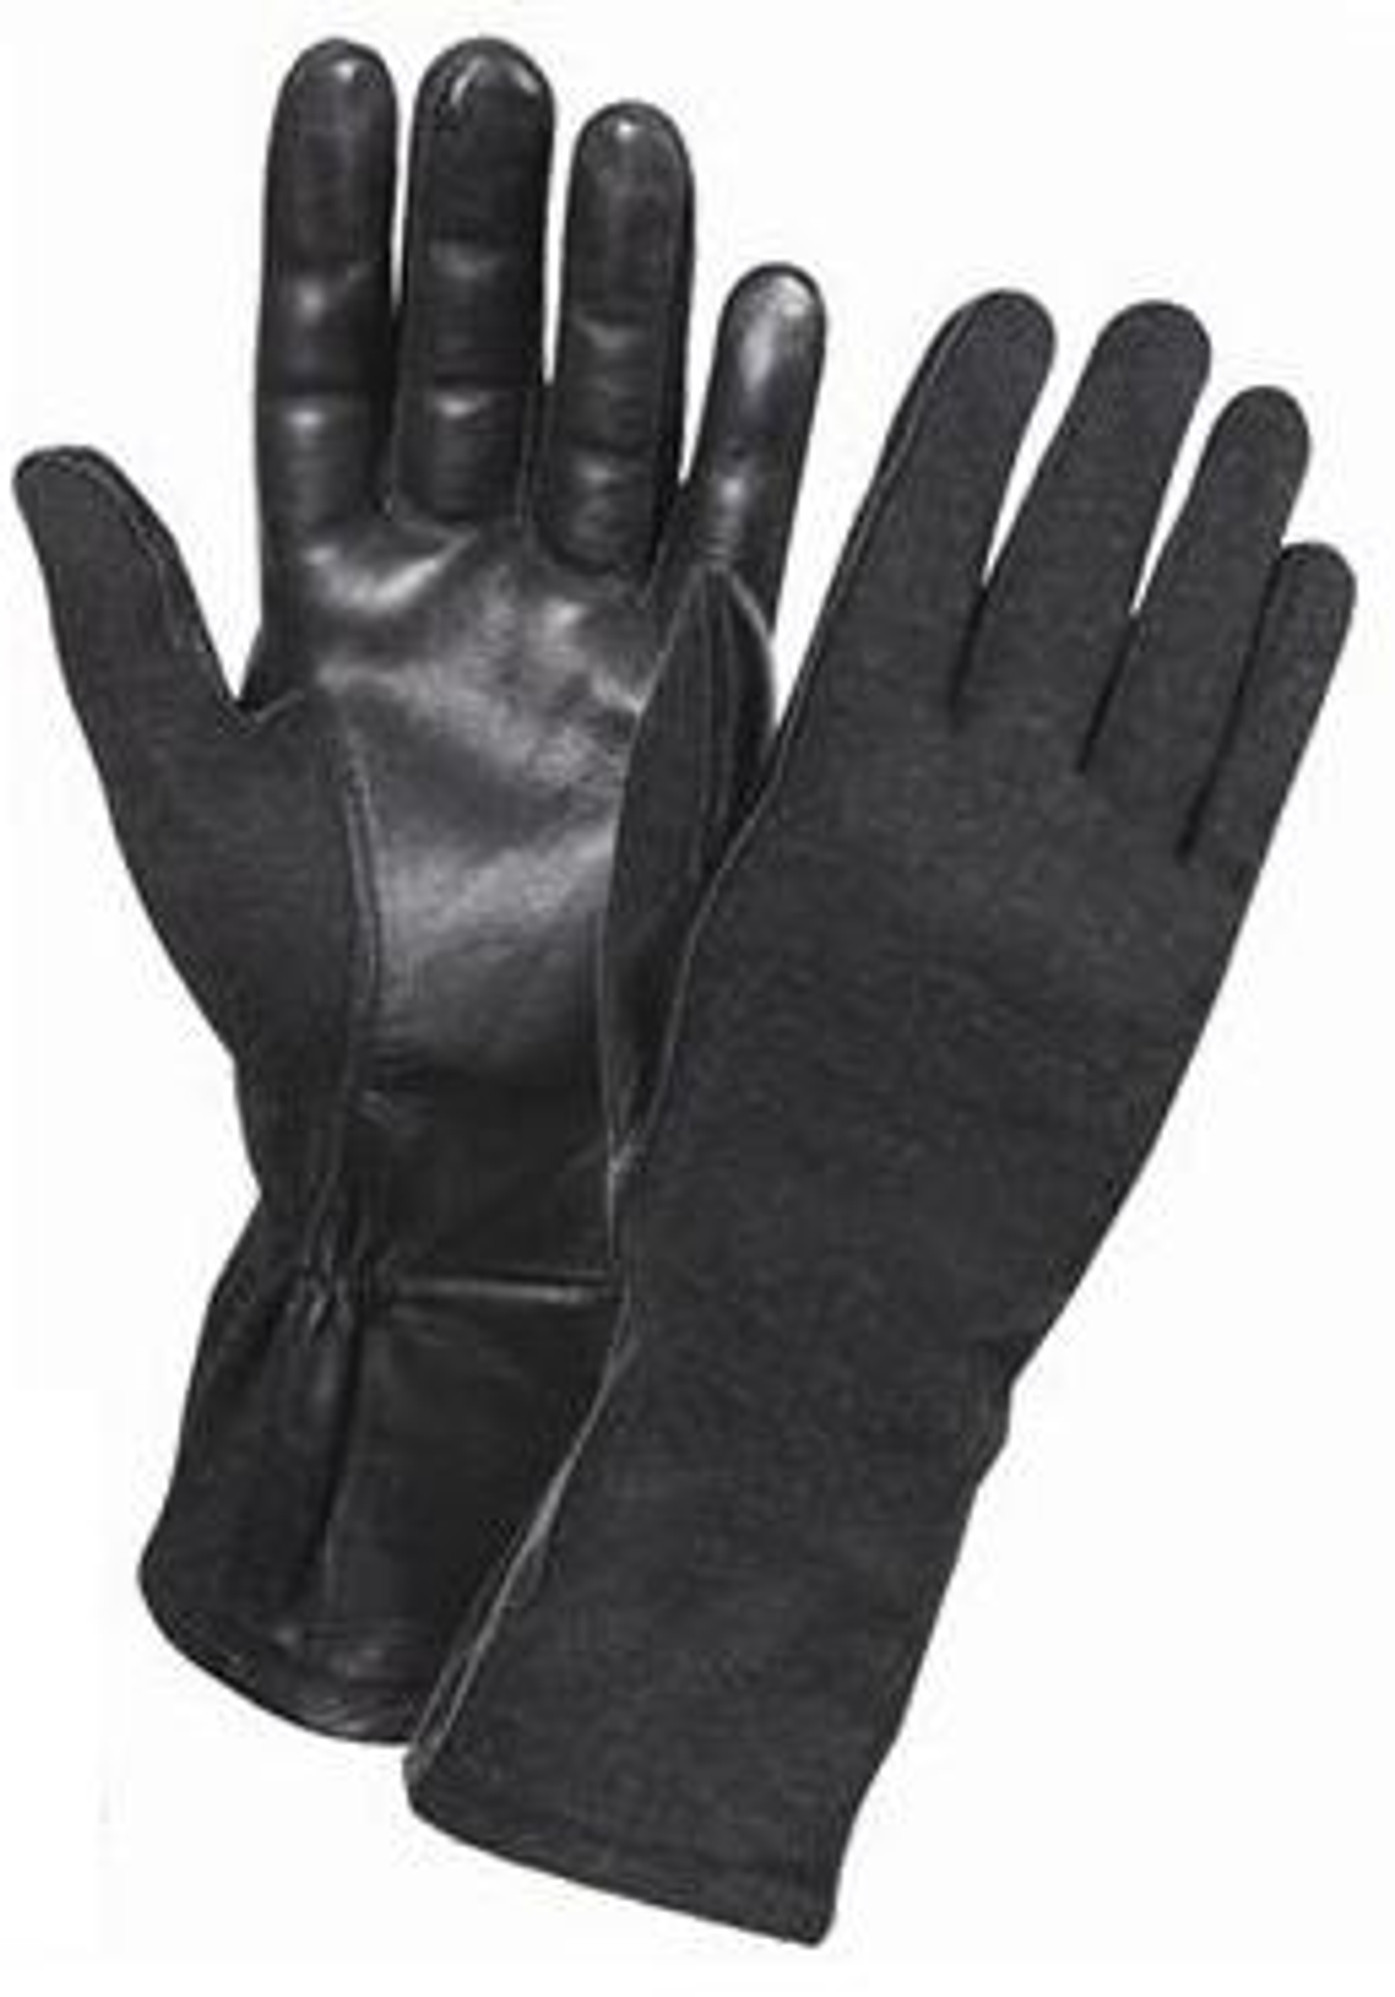 Rothco G.I. Type Flame & Heat Resistant Flight Gloves - Black